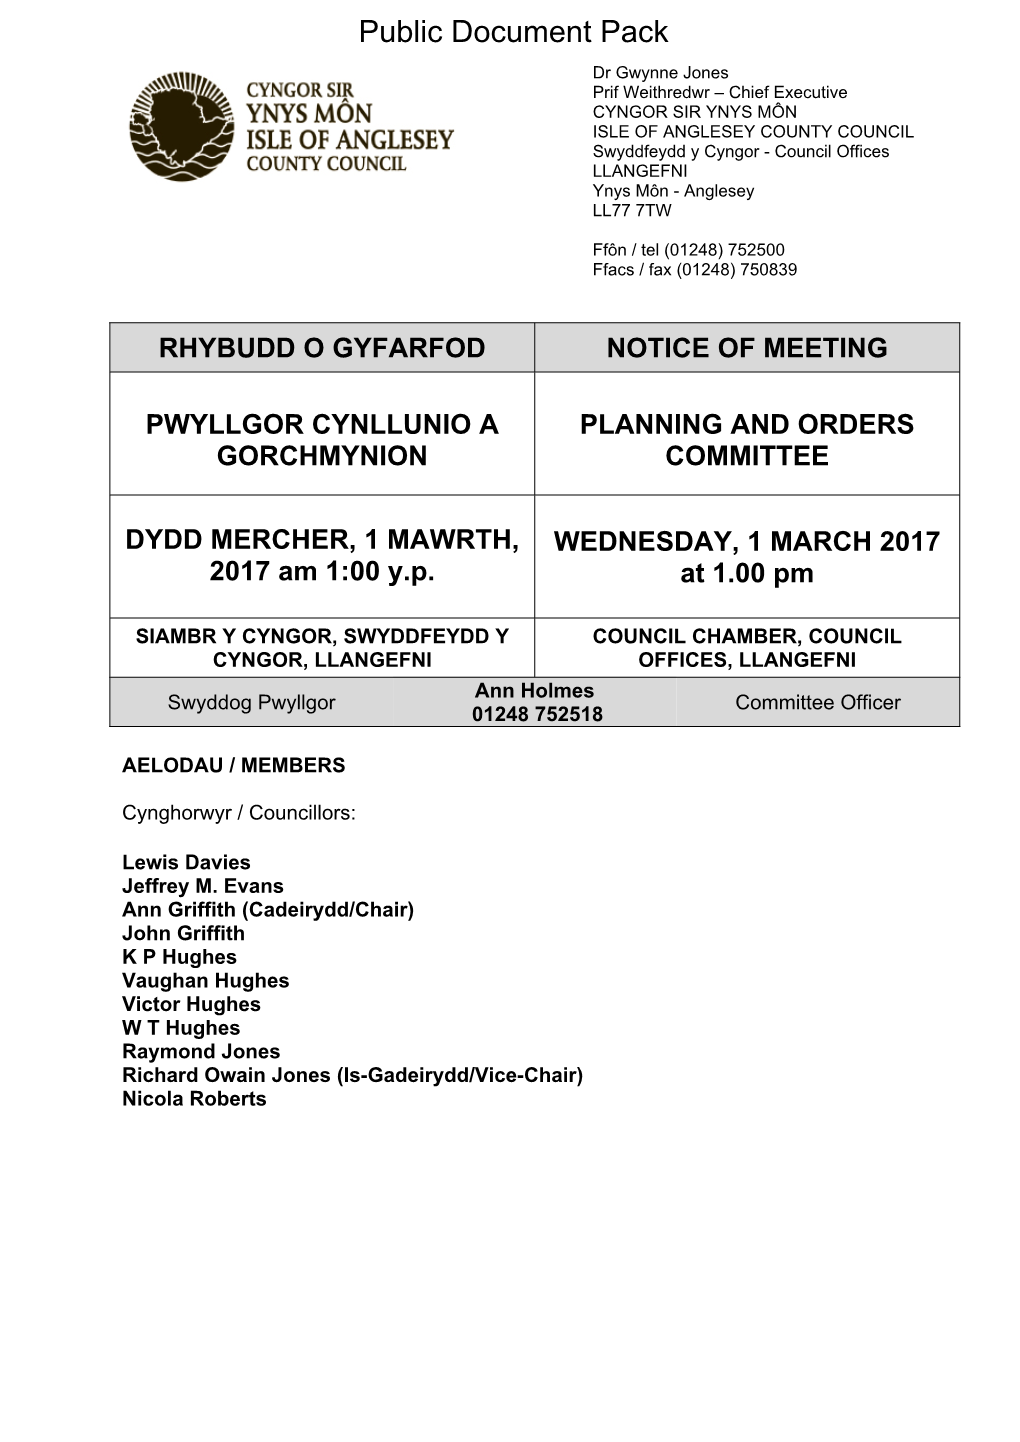 (Public Pack)Agenda Document for Planning and Orders Committee, 01